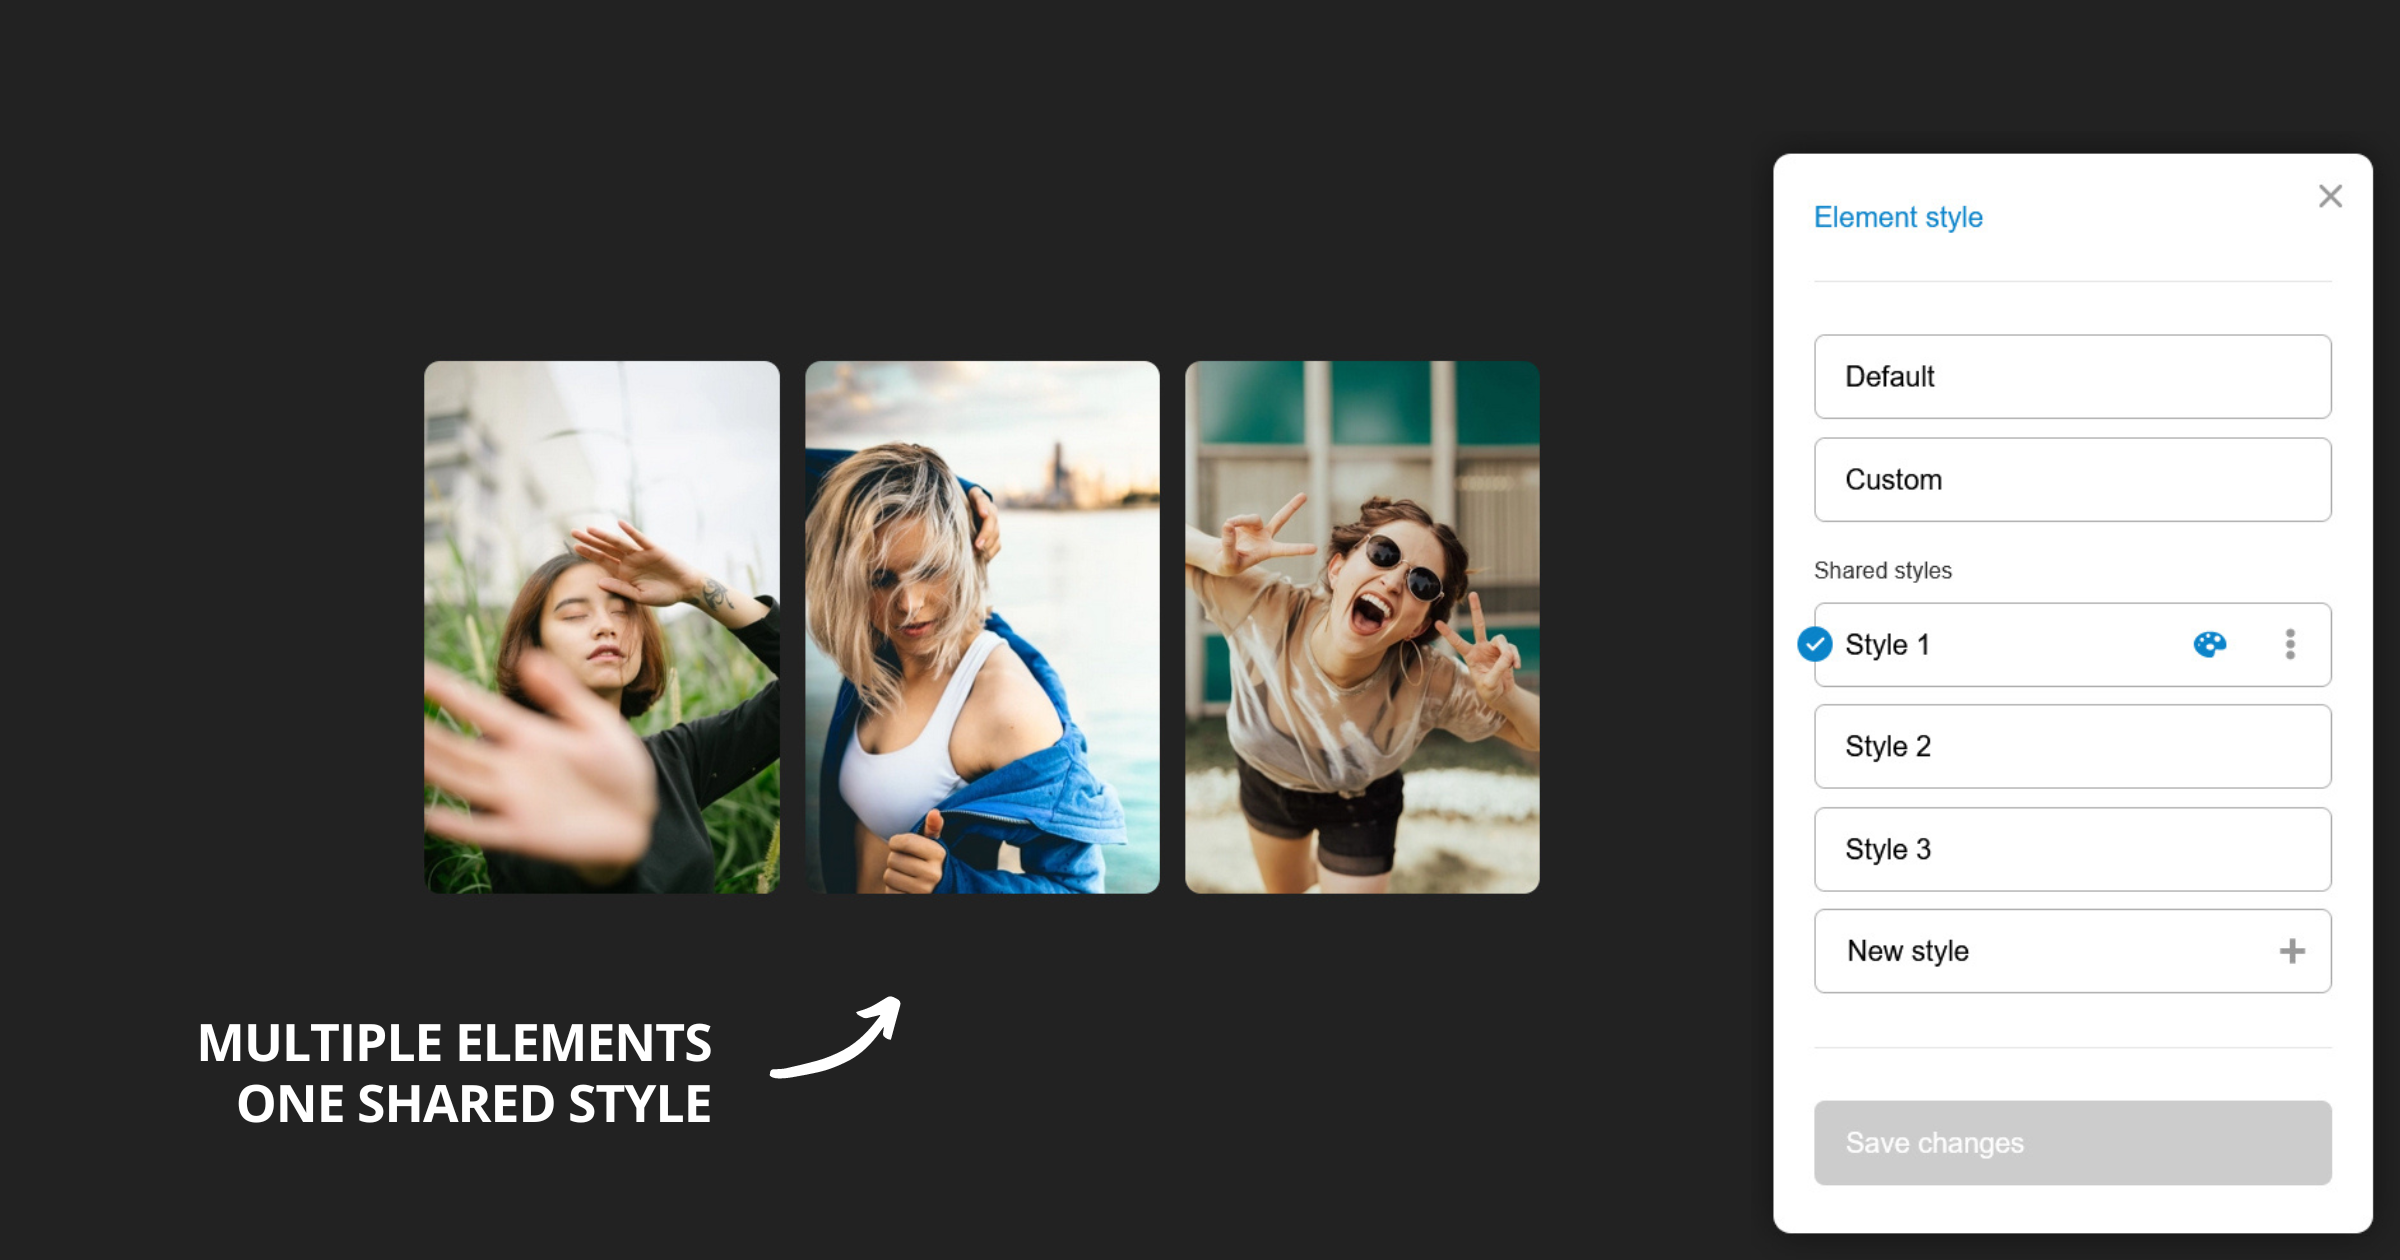 New: Shared elements styles